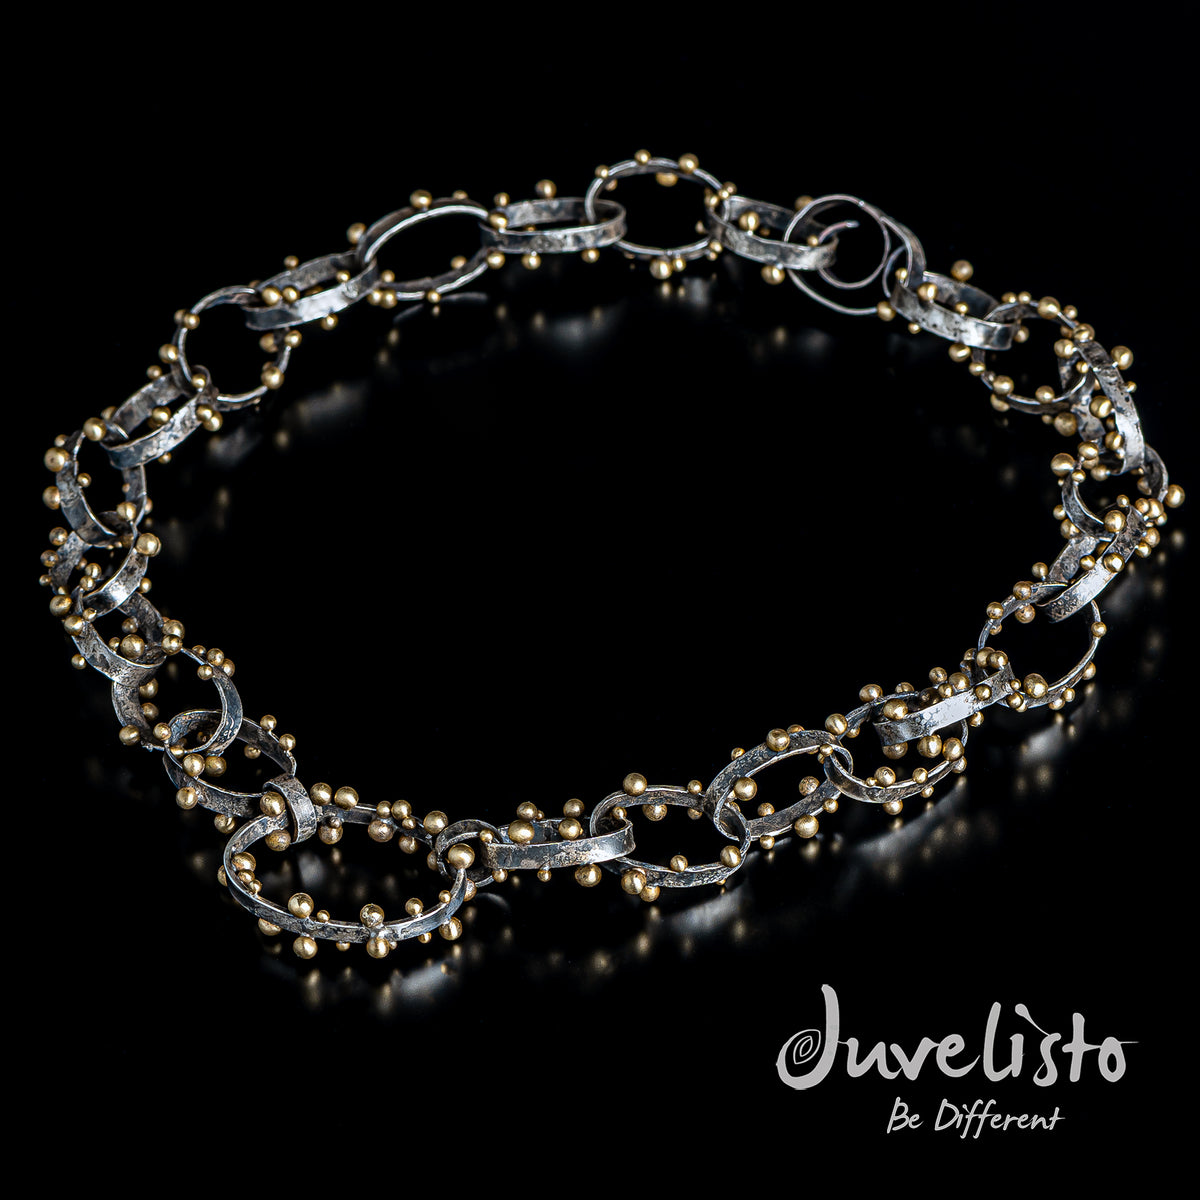 Juvelisto Design Sterling Silver Textured Link Necklace With Bronze accents and Spiral Clasp